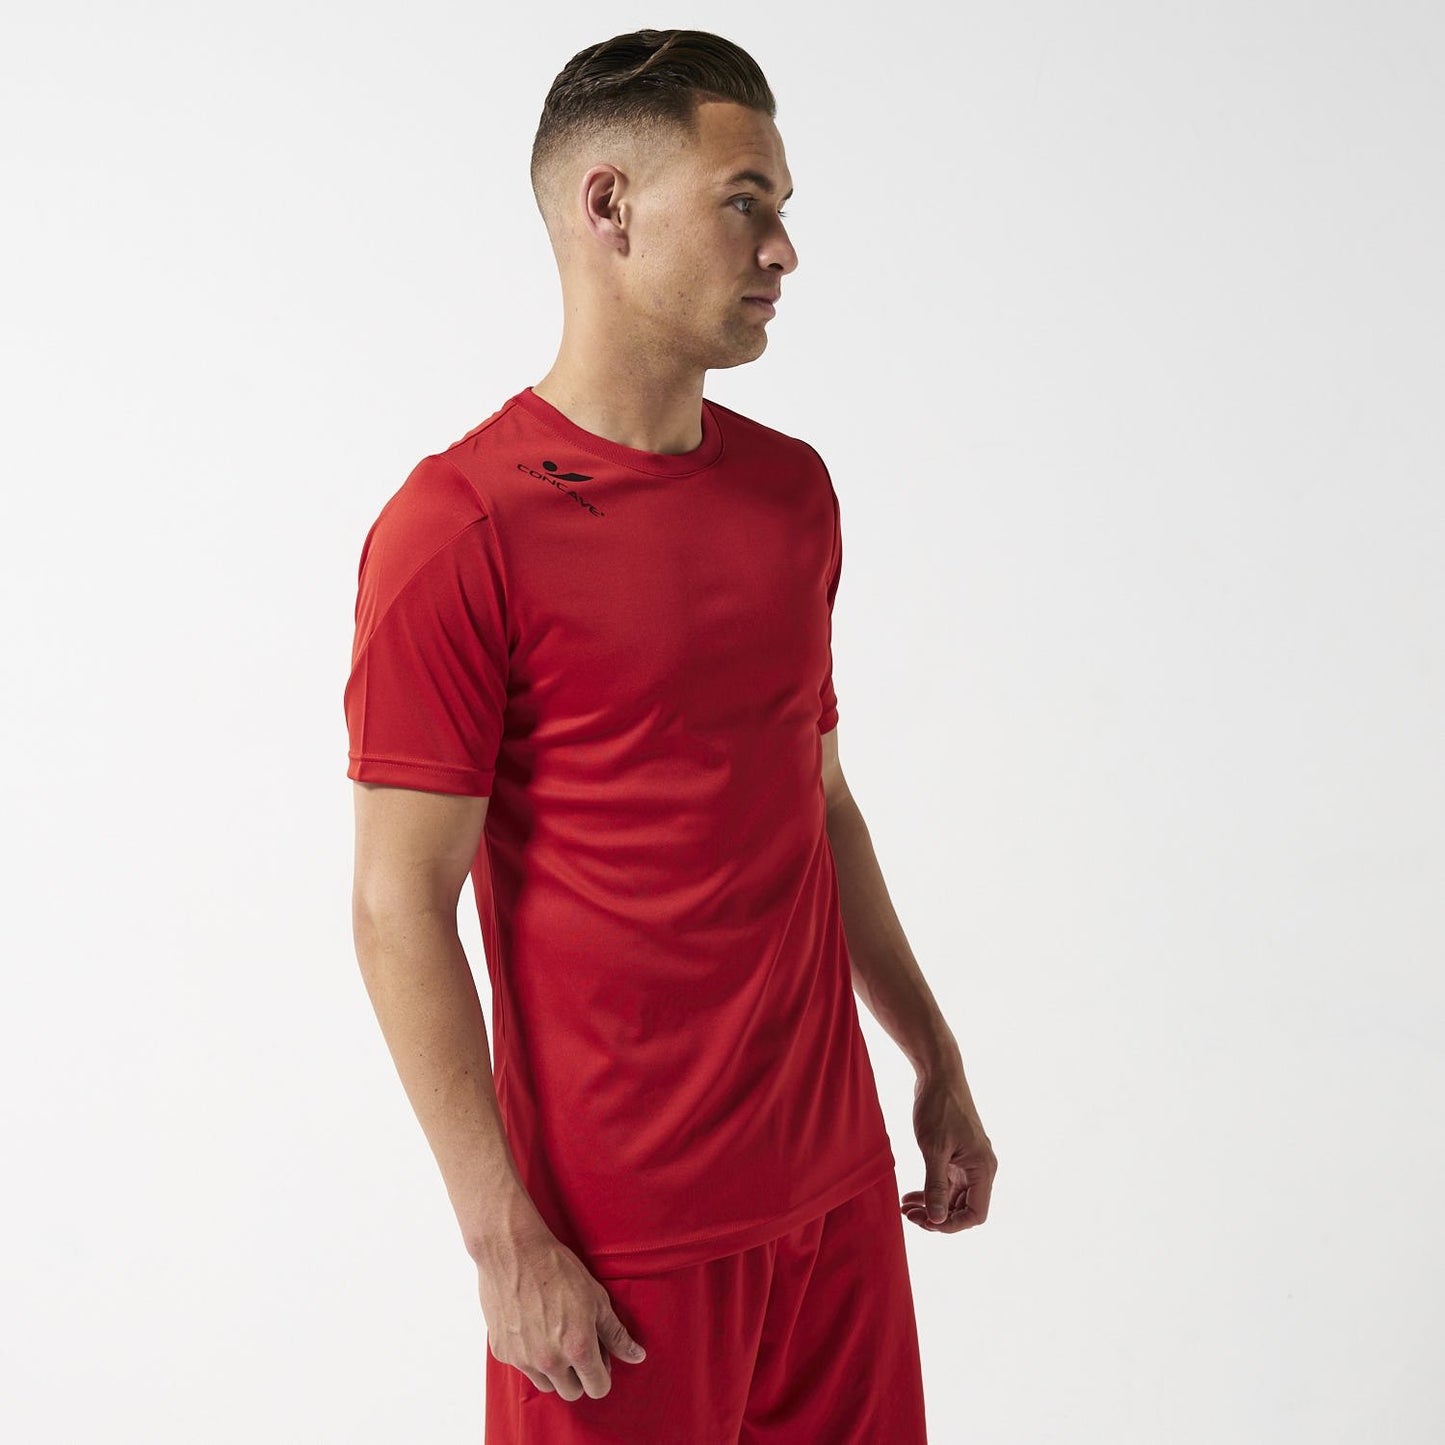 Concave Performance Top - Red/Black